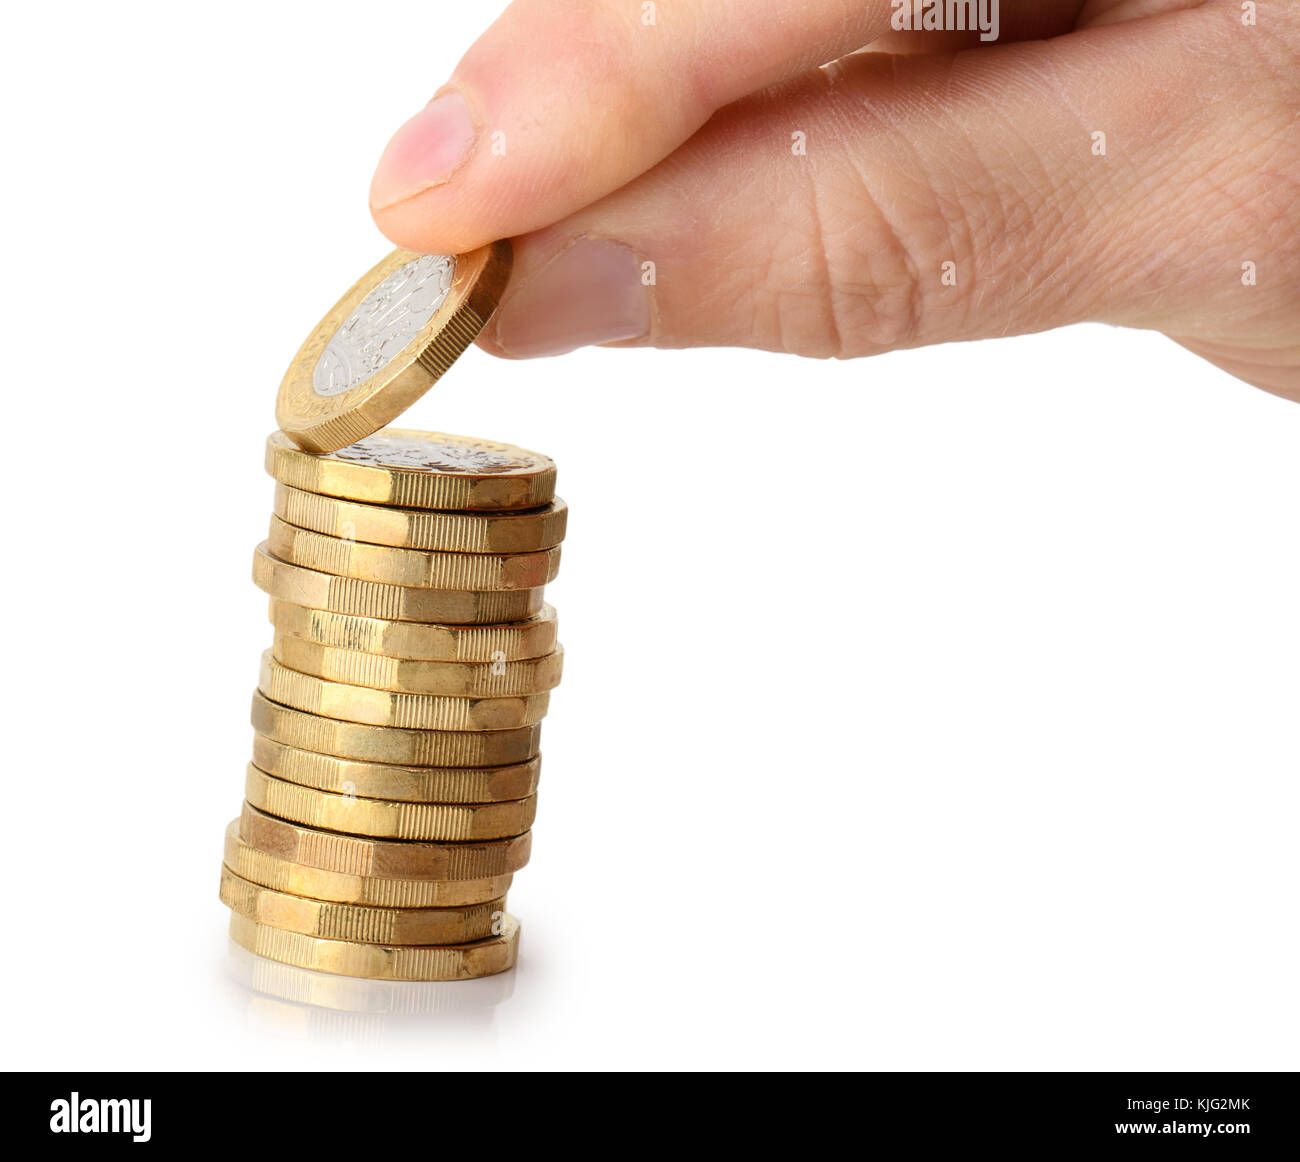 taking a coin from the stack, isolated on a white background Stock Photo